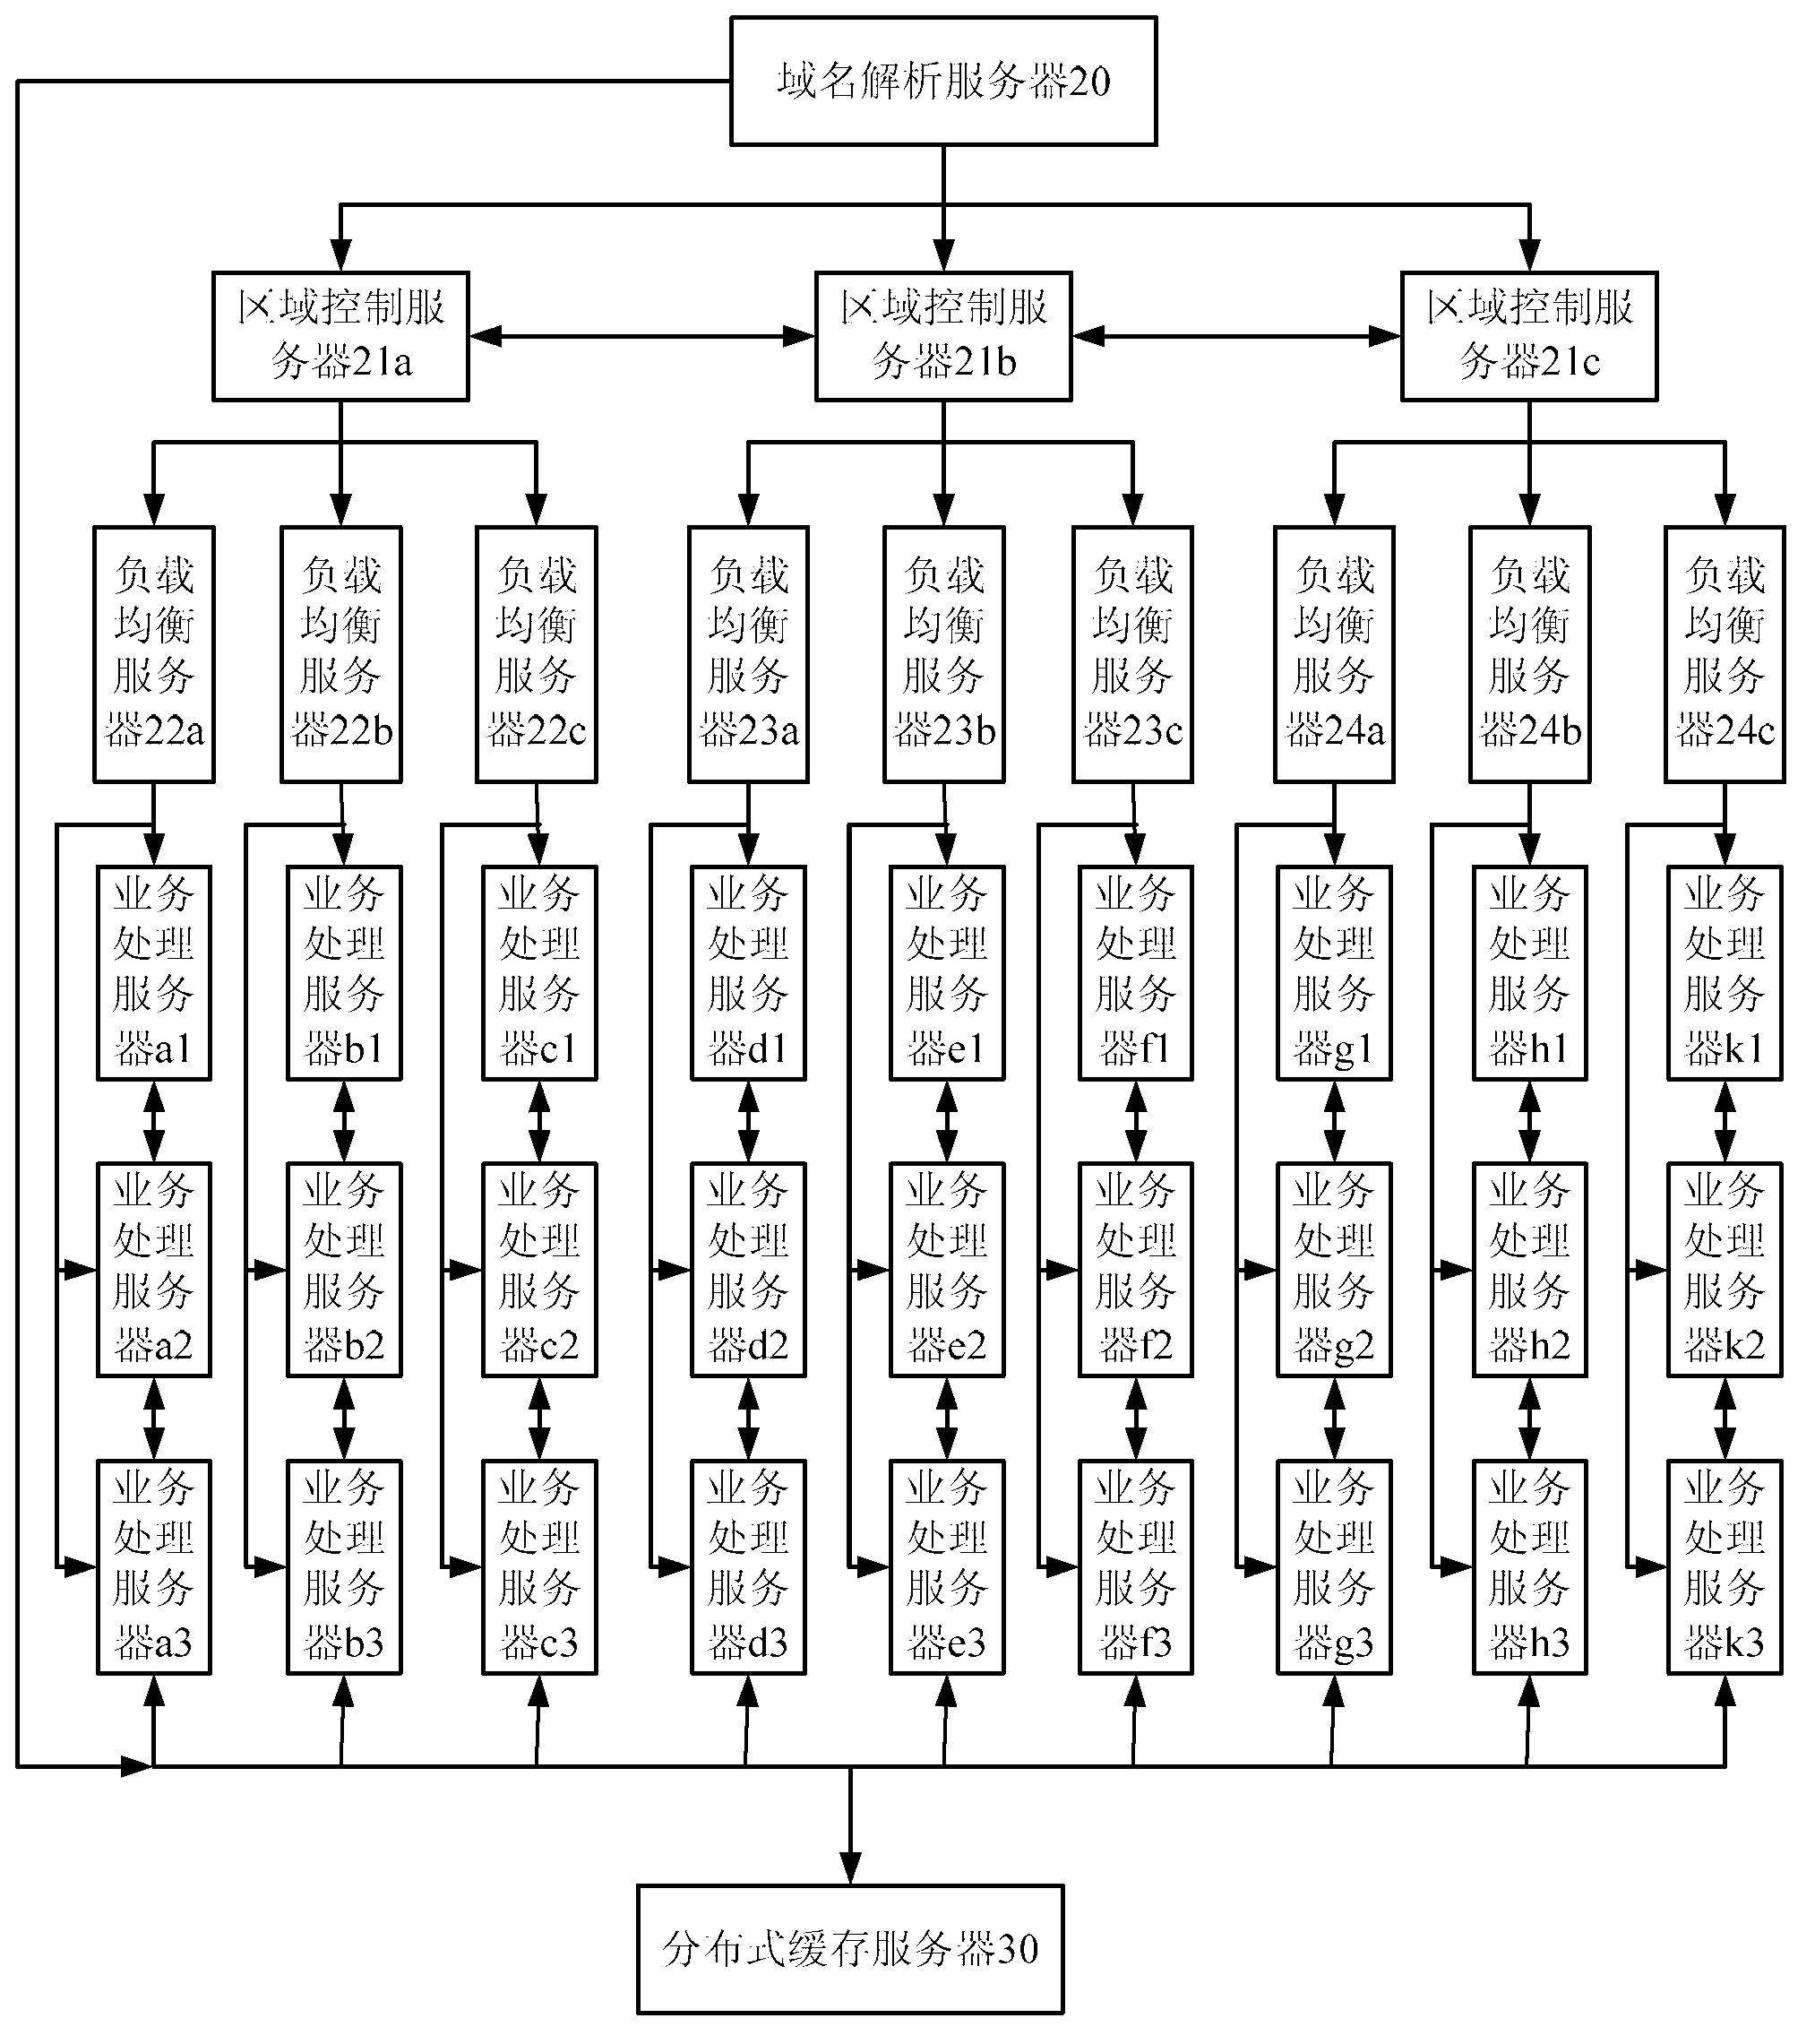 Method and system for processing network meeting drift